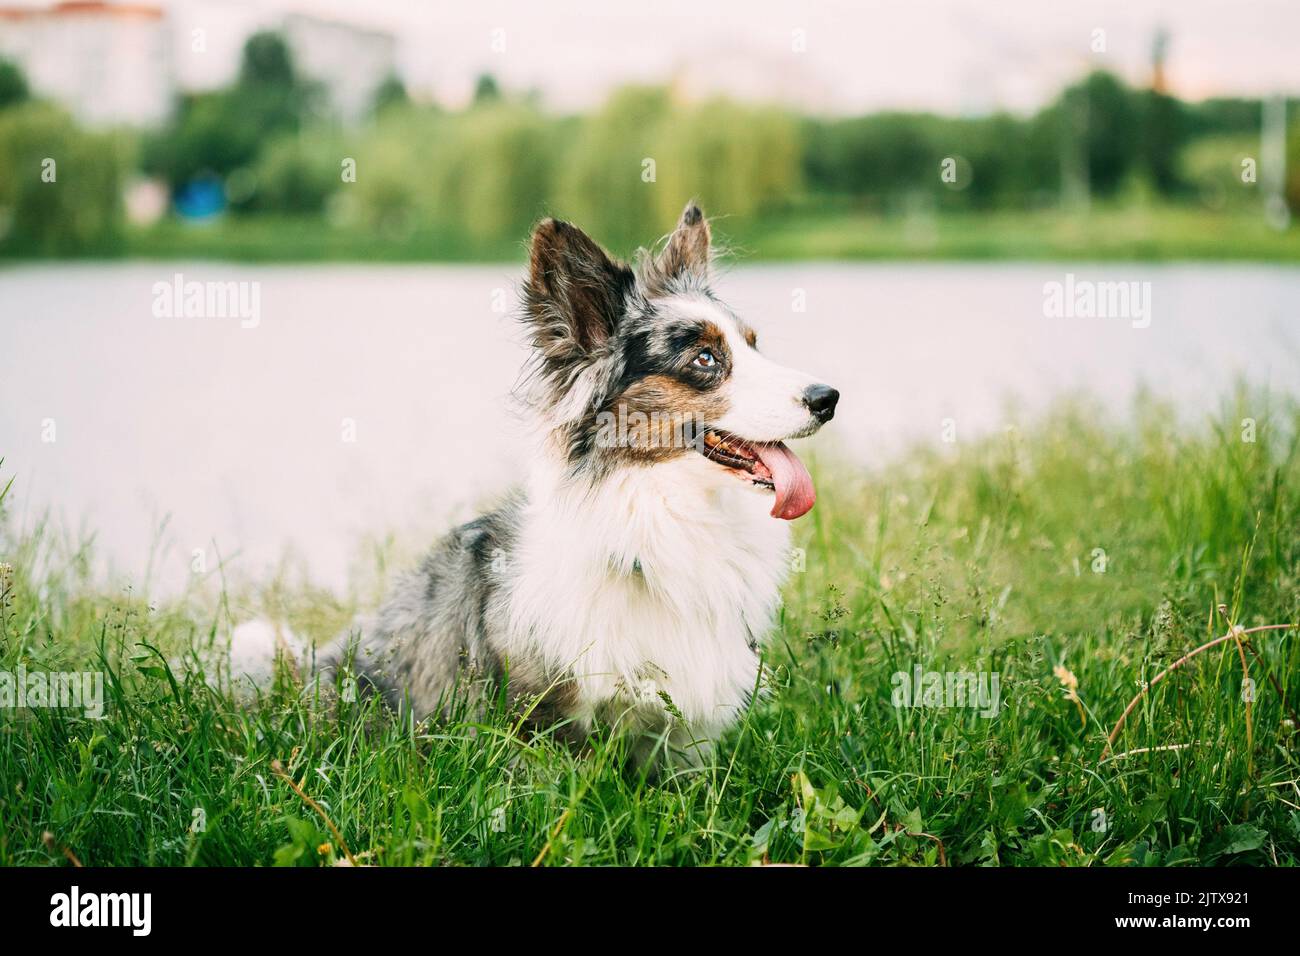 Funny Blue Merle Cardigan Welsh Corgi Dog Playing In Green Summer Grass At Lake In Park. Welsh Corgi Is A Small Type Of Herding Dog That Originated Stock Photo